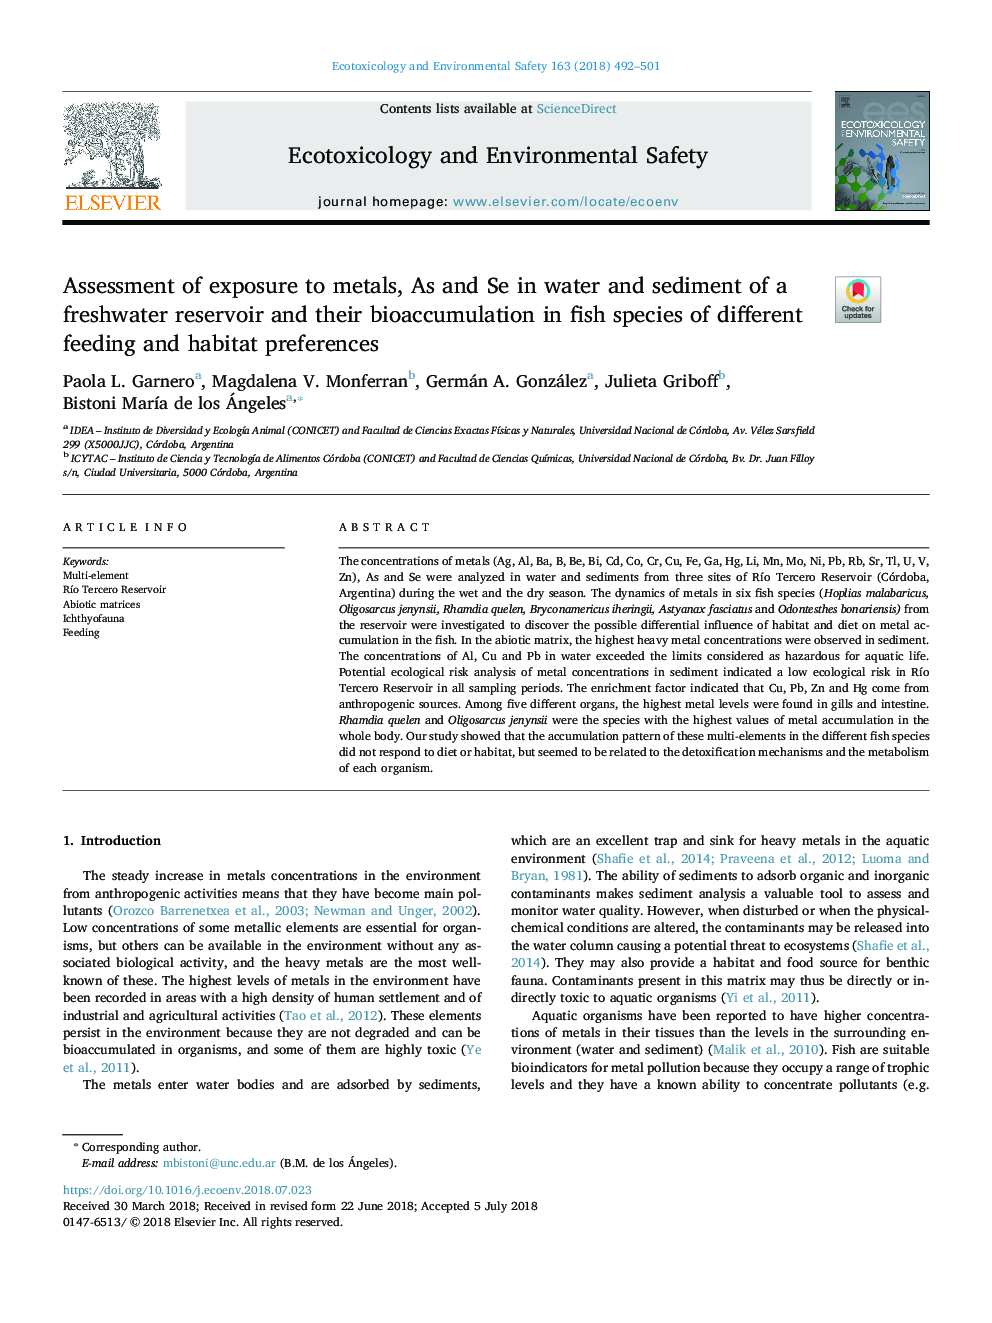 Assessment of exposure to metals, As and Se in water and sediment of a freshwater reservoir and their bioaccumulation in fish species of different feeding and habitat preferences